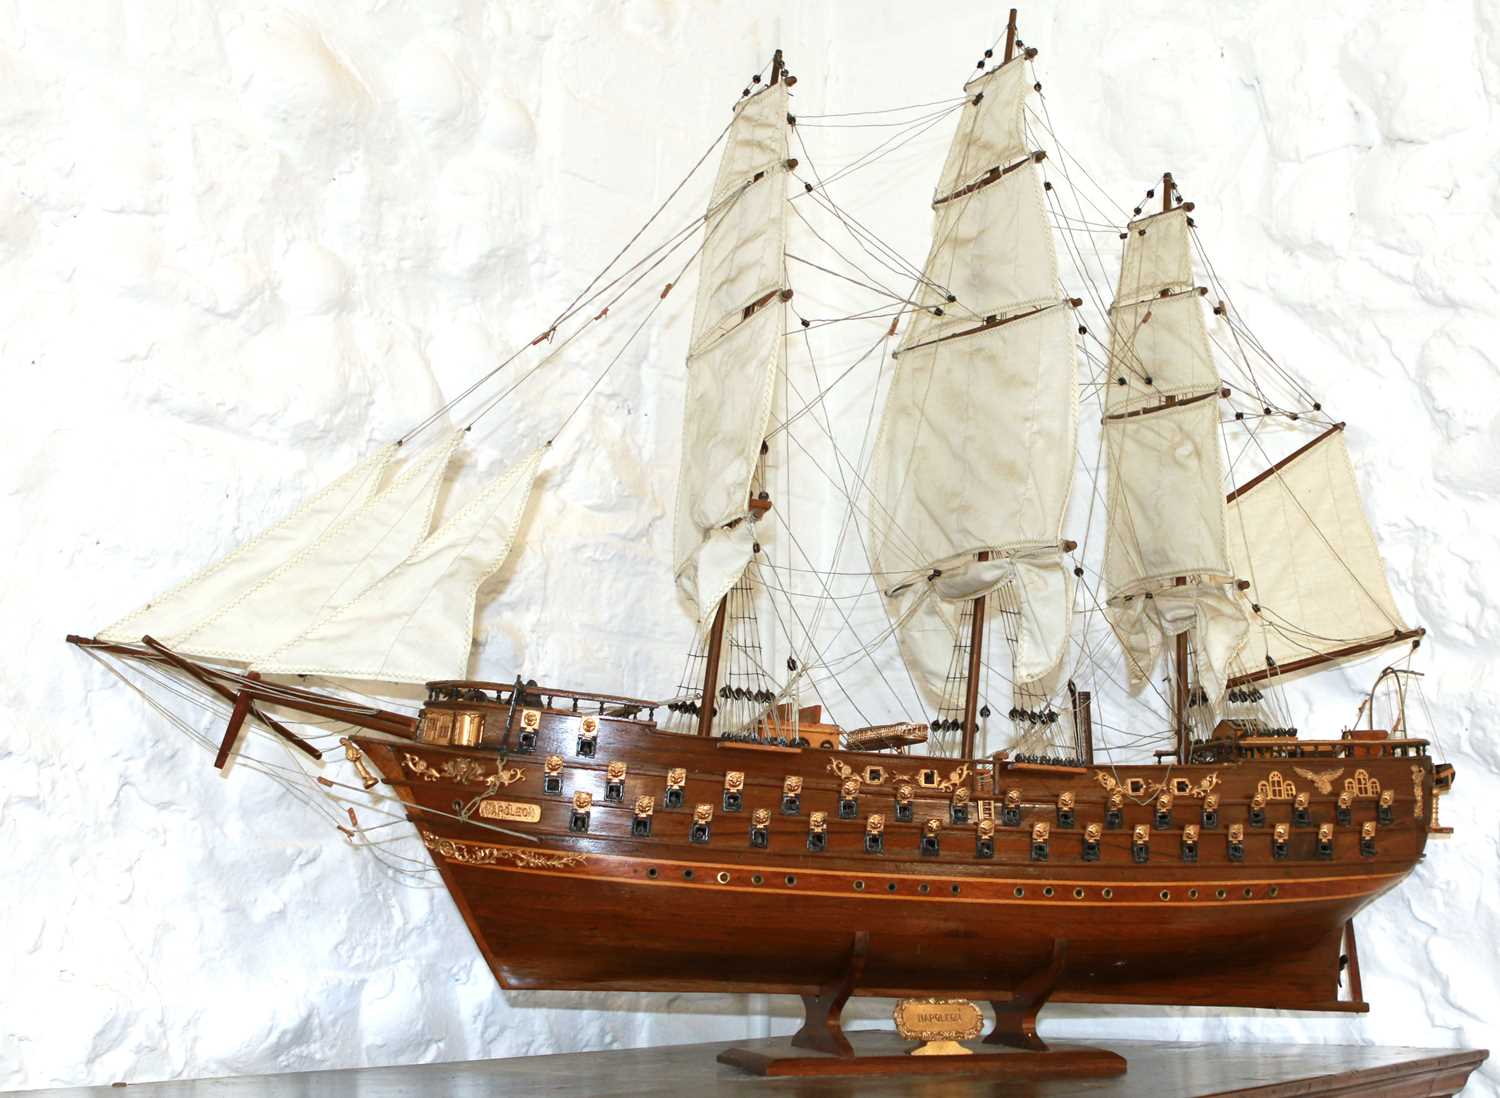 Model Ship of the Napolean